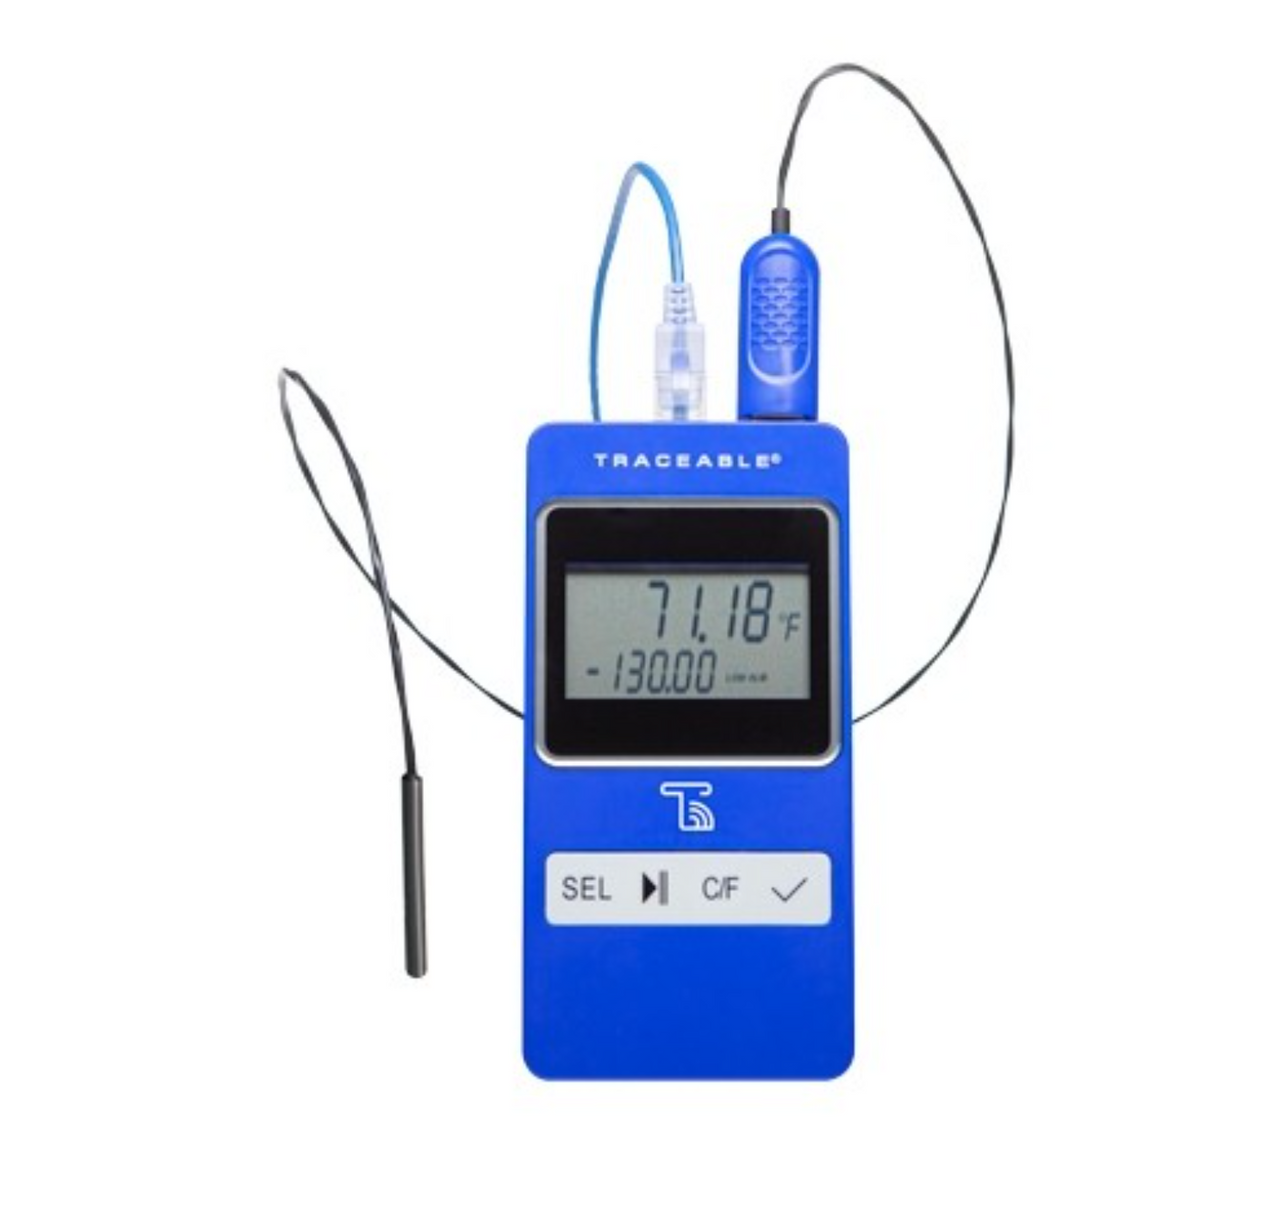 https://cdn11.bigcommerce.com/s-ryt90hjx0j/images/stencil/1280x1280/products/26862/33560/Traceable_Data_Logging_Ethernet_Thermometers__35156__18065.1644833242.PNG?c=1?imbypass=on